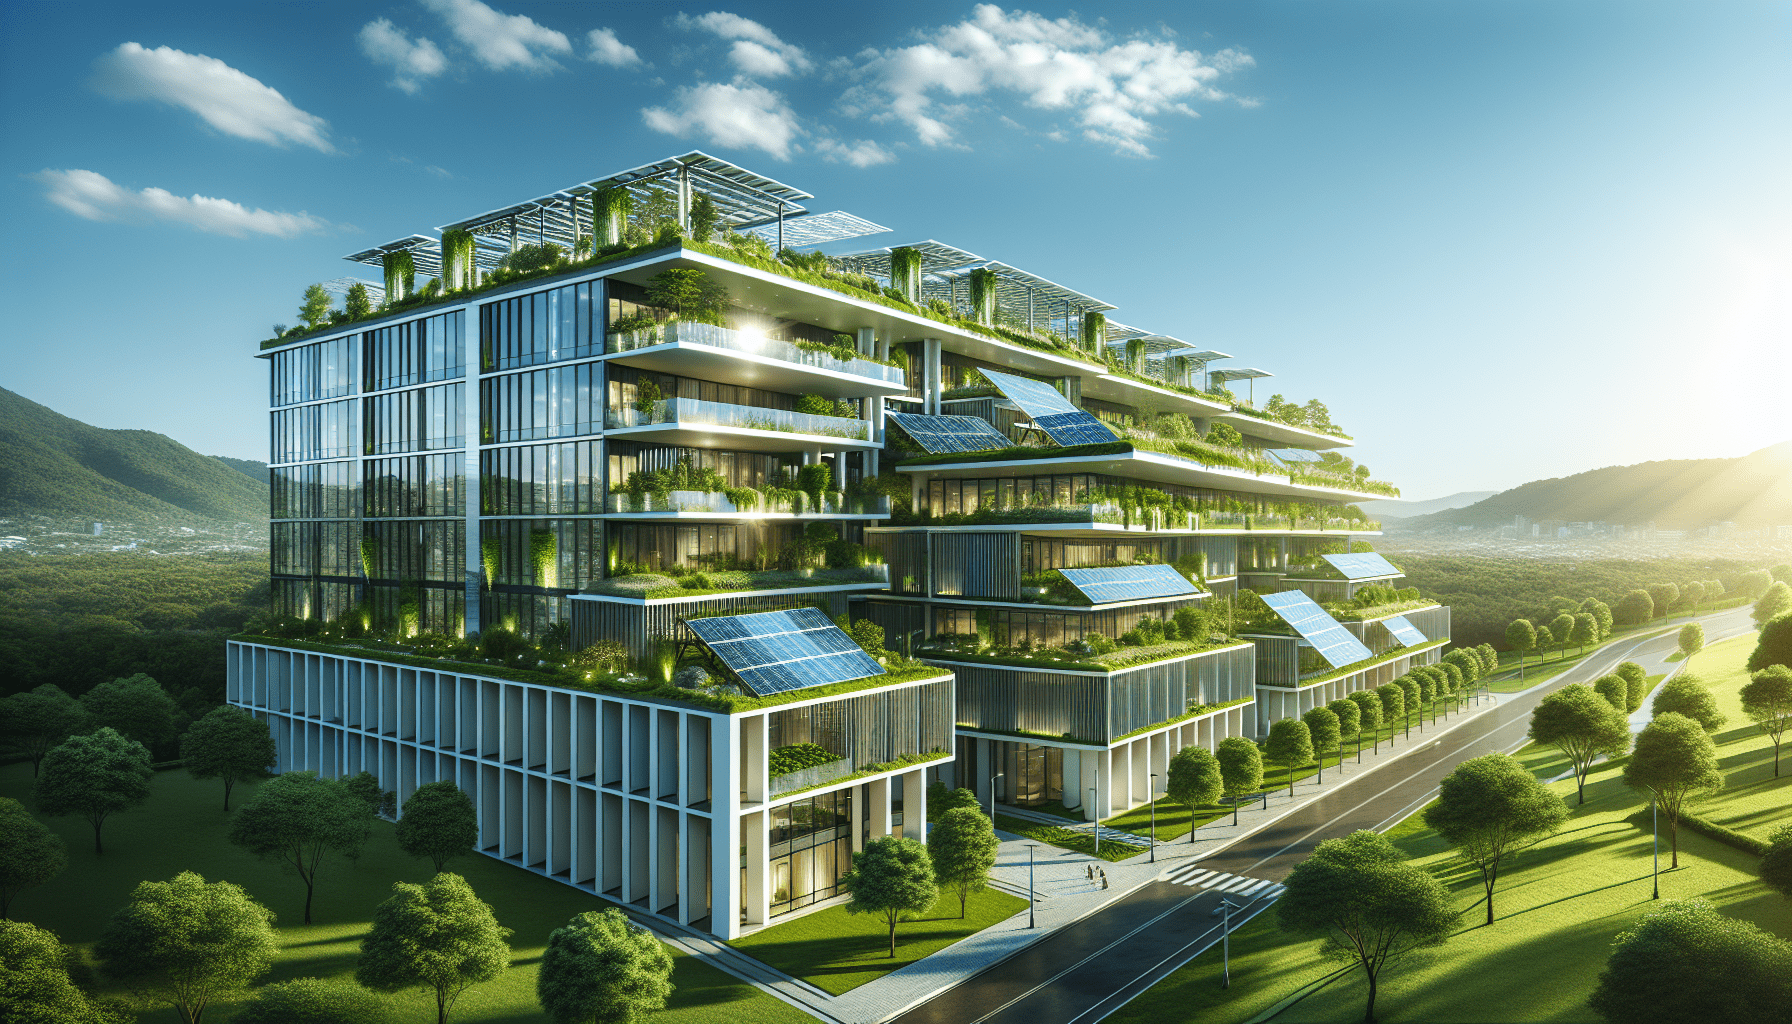 How Does Sustainable Architecture Affect Building Codes?